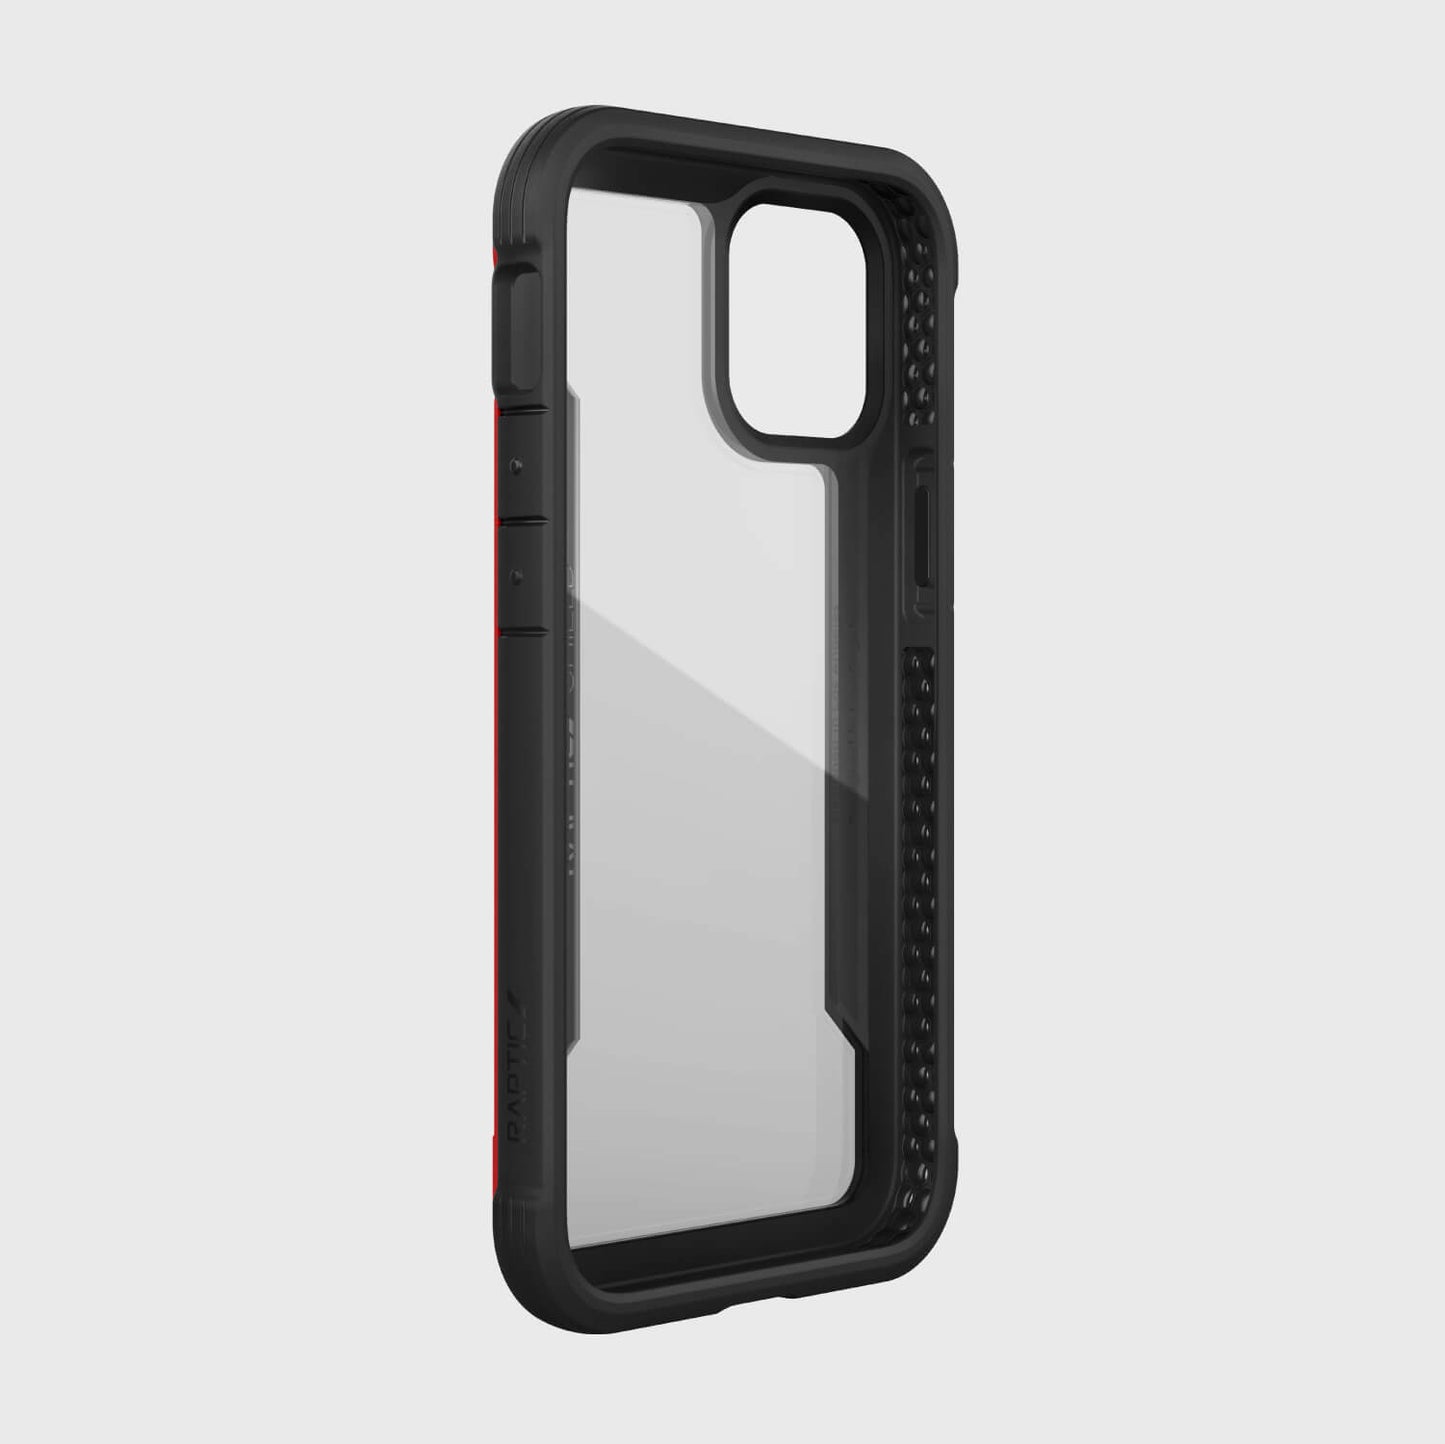 The iPhone 12 Mini Case - SHIELD from Raptic is black and red.